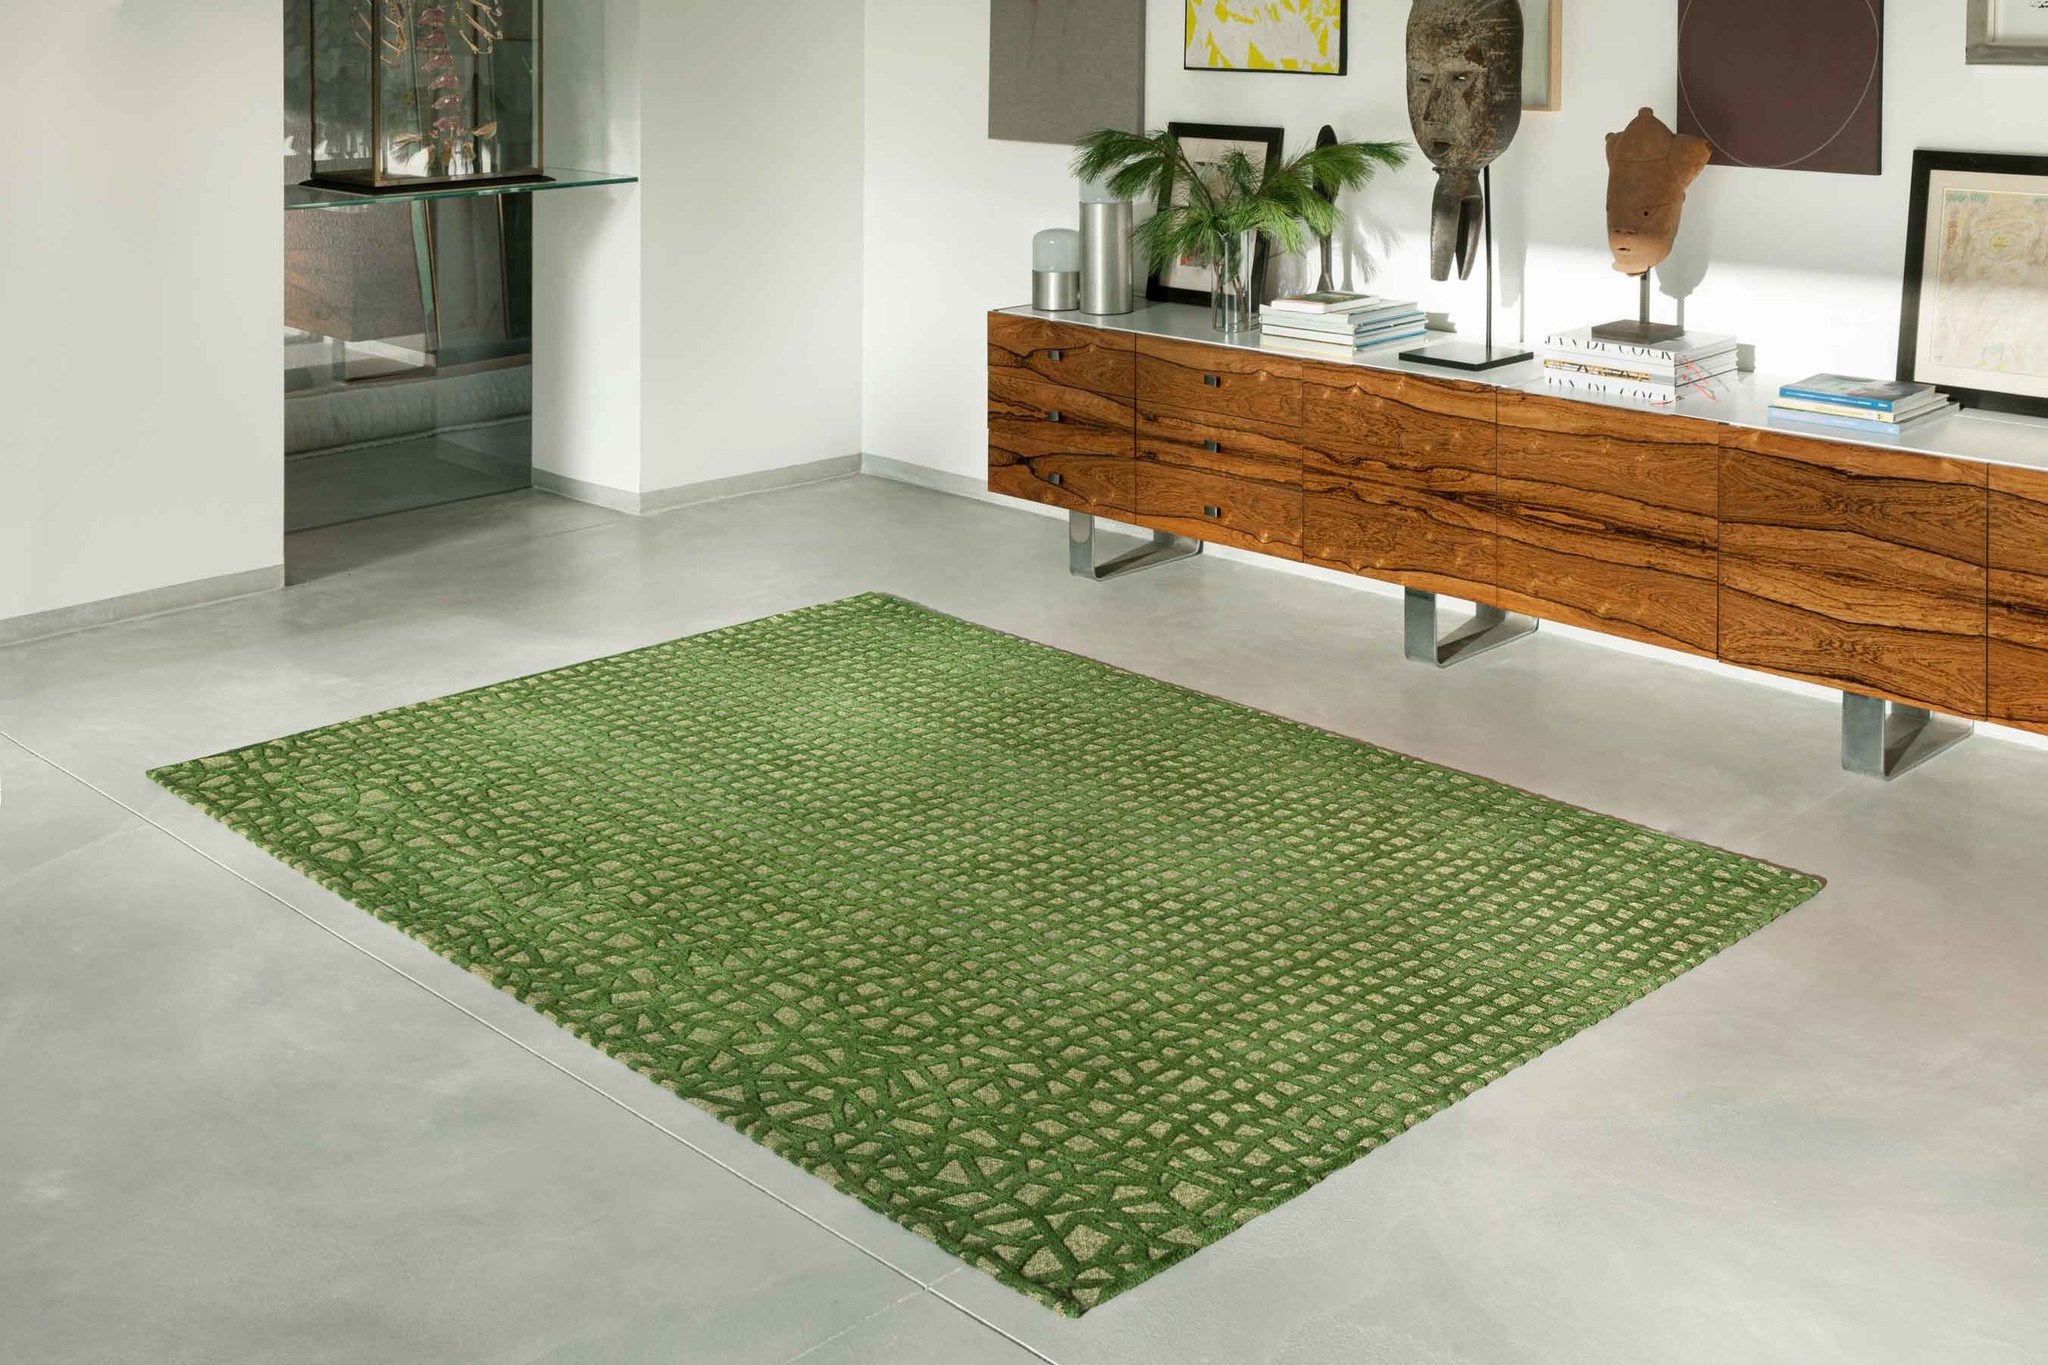 Green Checkered Flatwoven Rug ☞ Size: 9' 2" x 13' (280 x 390 cm)